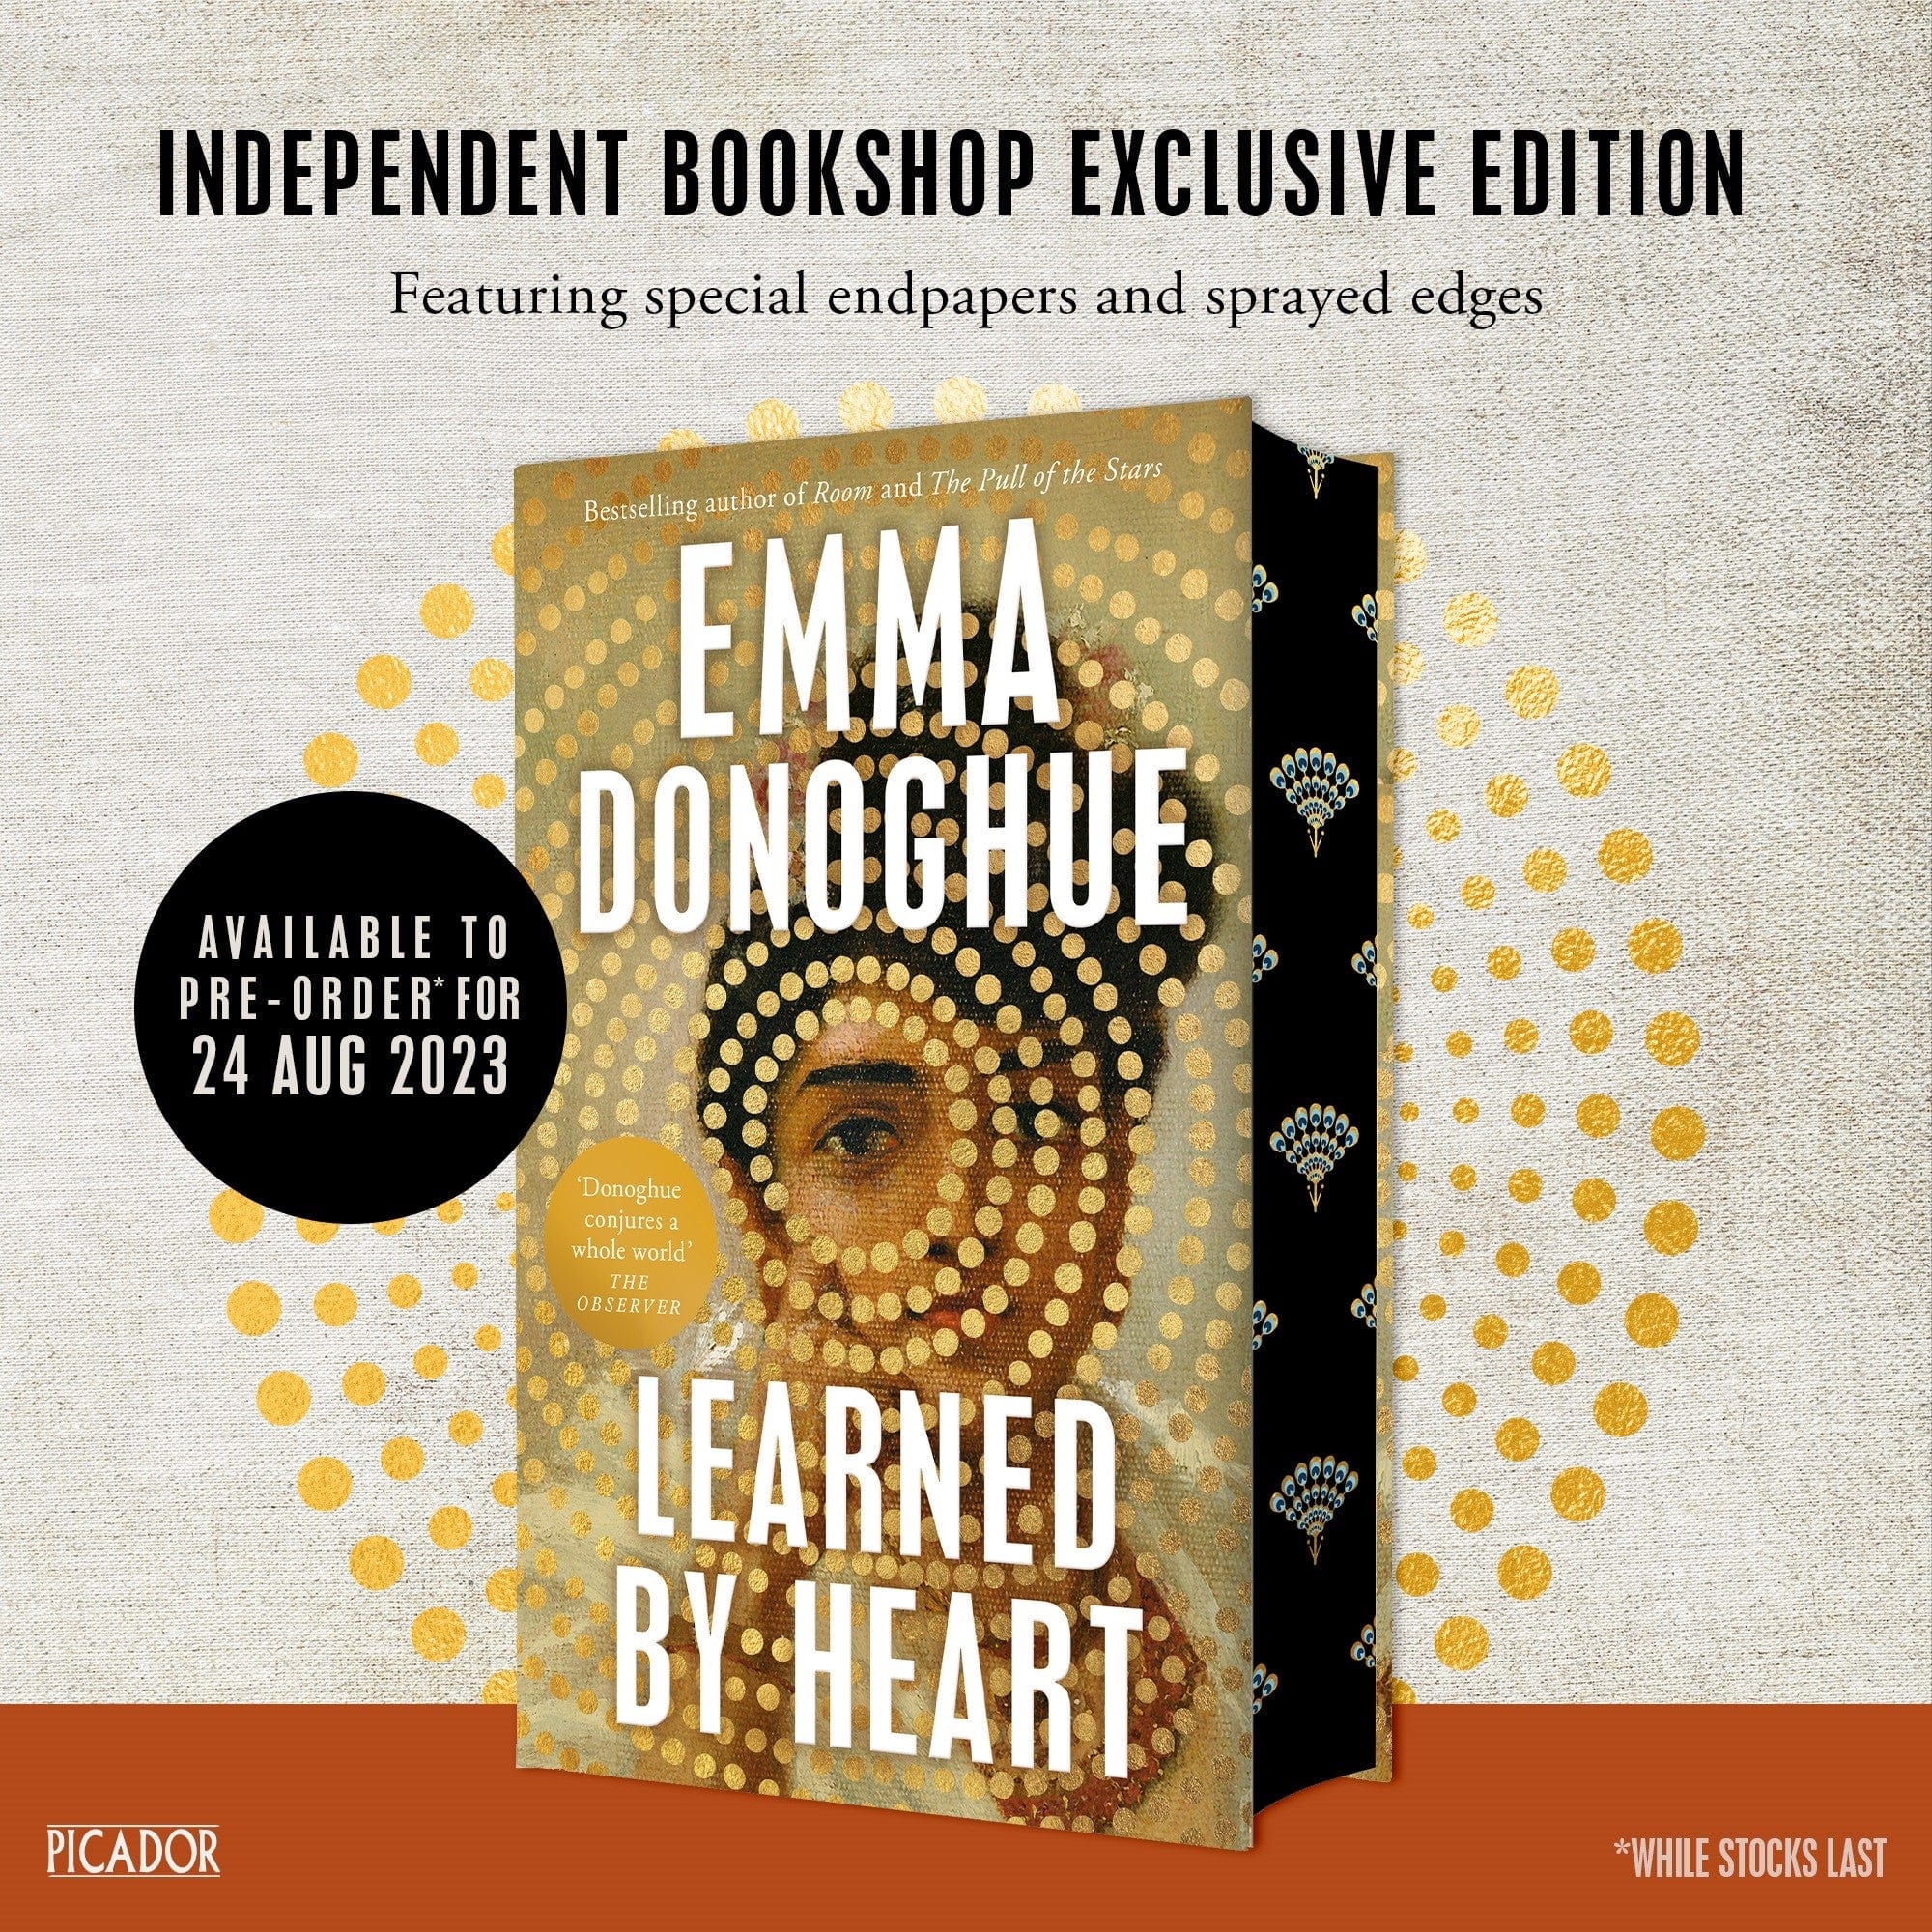 Donoghue, Emma PREORDER FICTION Learned By Heart Indie Bookshop Exclusive